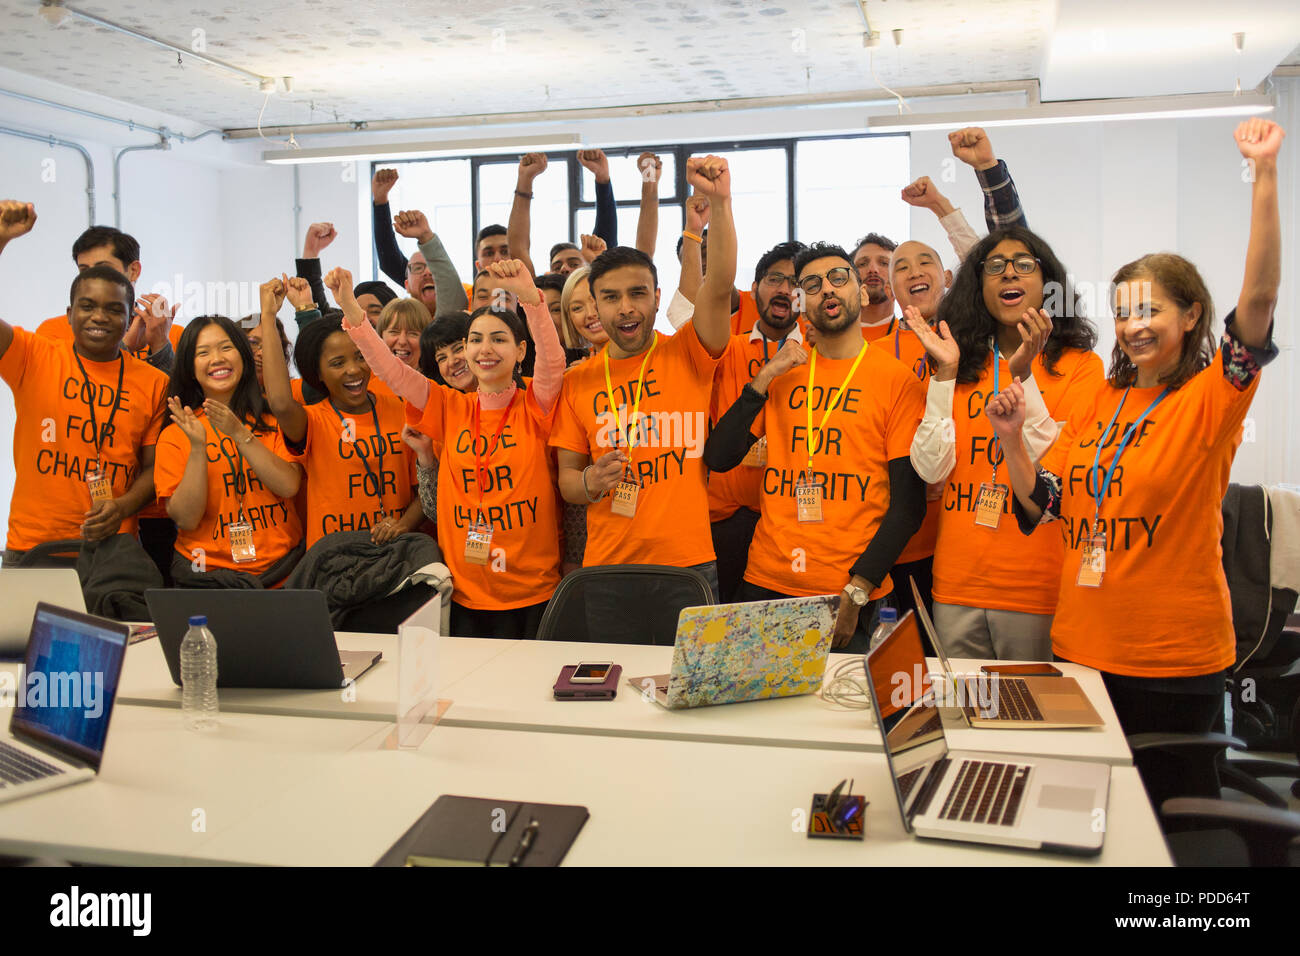 Portrait confident hackers cheering, coding for charity at hackathon Stock Photo